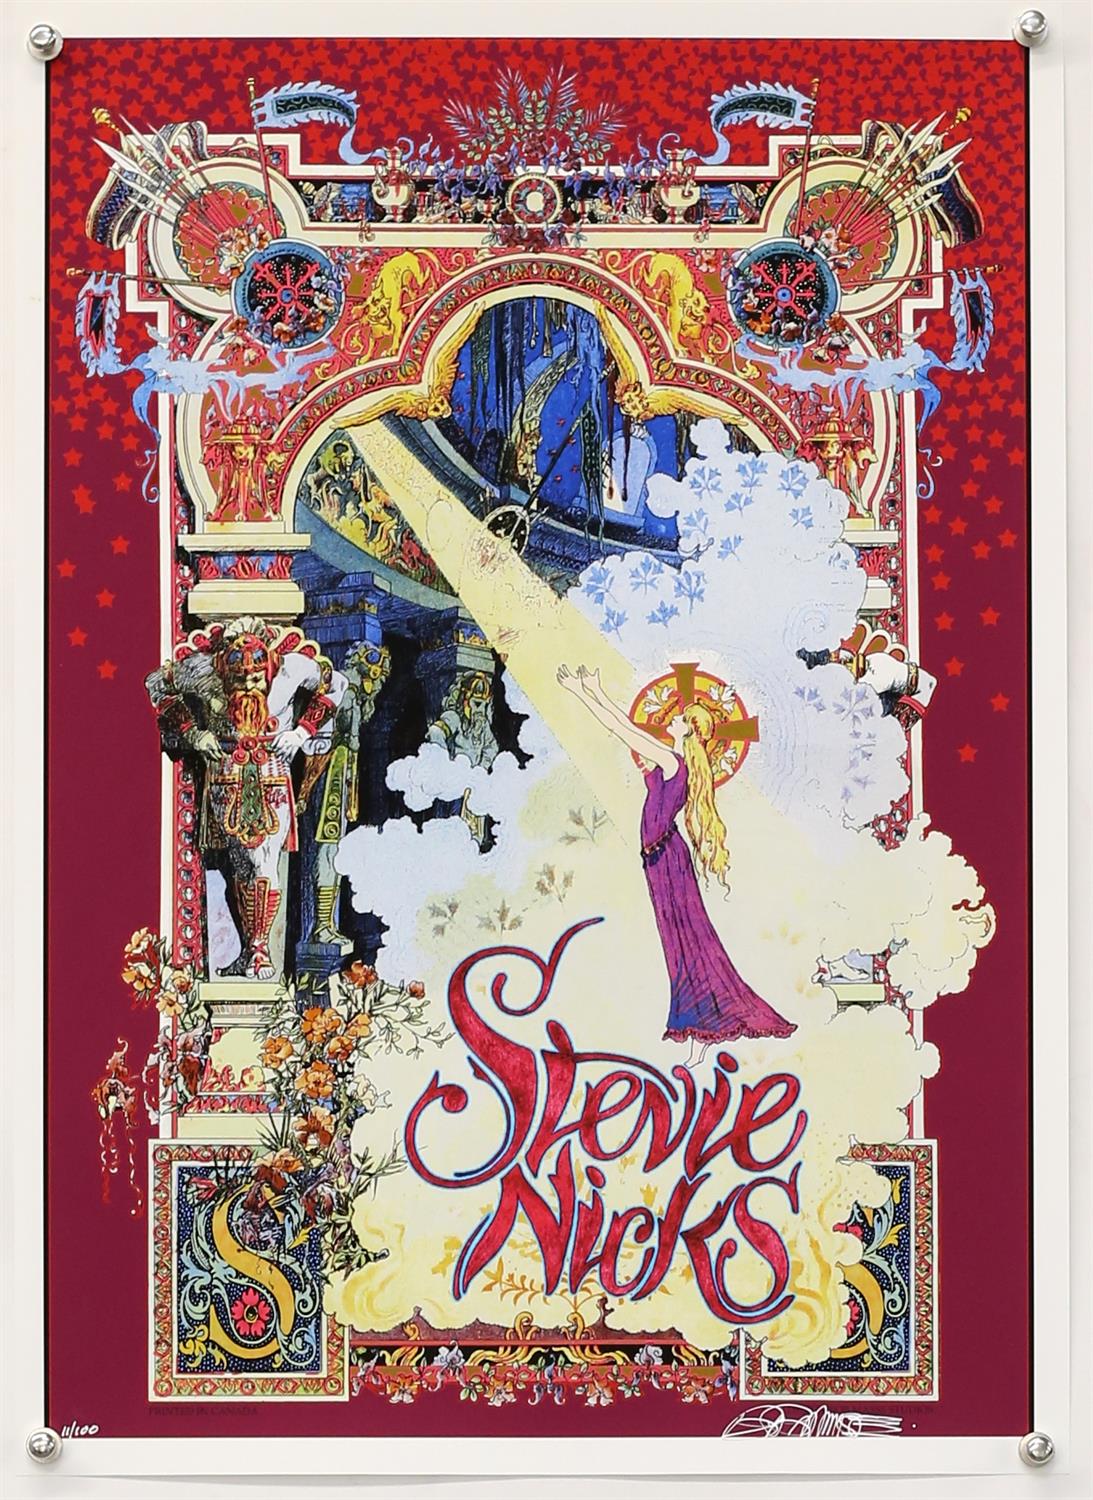 Fleetwood Mac interest - a group 8 of posters including a limited edition Stevie Nicks screen print